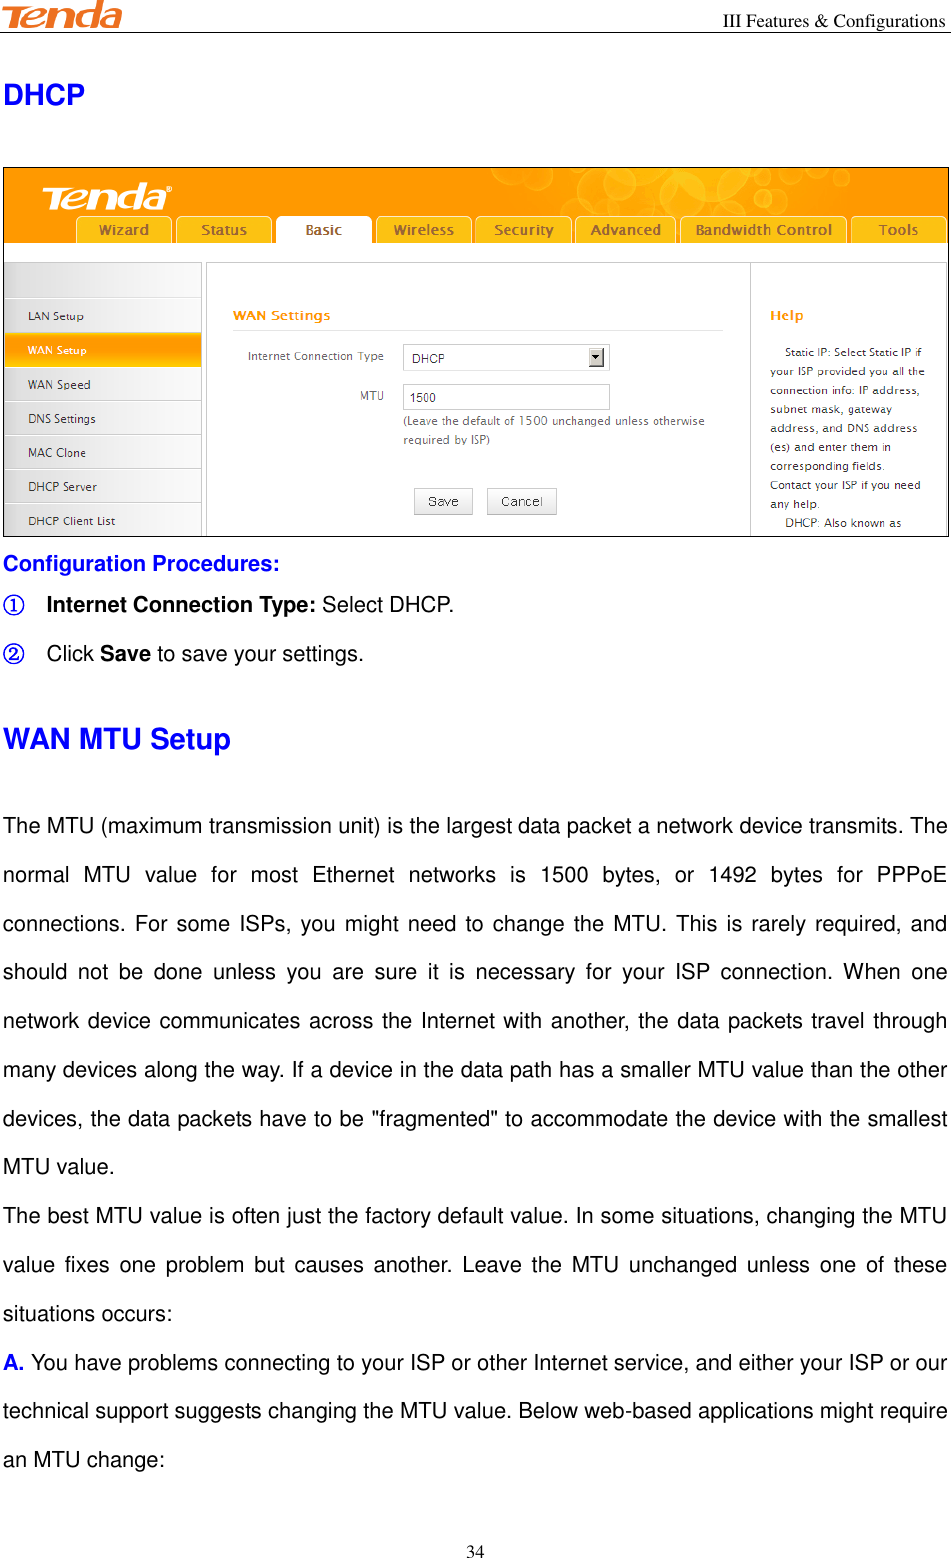                                                        III Features &amp; Configurations           34 DHCP  Configuration Procedures: ① Internet Connection Type: Select DHCP. ② Click Save to save your settings. WAN MTU Setup The MTU (maximum transmission unit) is the largest data packet a network device transmits. The normal  MTU  value  for  most  Ethernet  networks  is  1500  bytes,  or  1492  bytes  for  PPPoE connections. For some ISPs, you might need to change the MTU. This is rarely required, and should  not  be  done  unless  you  are  sure  it  is  necessary  for  your  ISP  connection.  When  one network device communicates across the Internet with another, the data packets travel through many devices along the way. If a device in the data path has a smaller MTU value than the other devices, the data packets have to be &quot;fragmented&quot; to accommodate the device with the smallest MTU value. The best MTU value is often just the factory default value. In some situations, changing the MTU value fixes  one problem but  causes  another.  Leave the  MTU unchanged unless one  of  these situations occurs: A. You have problems connecting to your ISP or other Internet service, and either your ISP or our technical support suggests changing the MTU value. Below web-based applications might require an MTU change: 